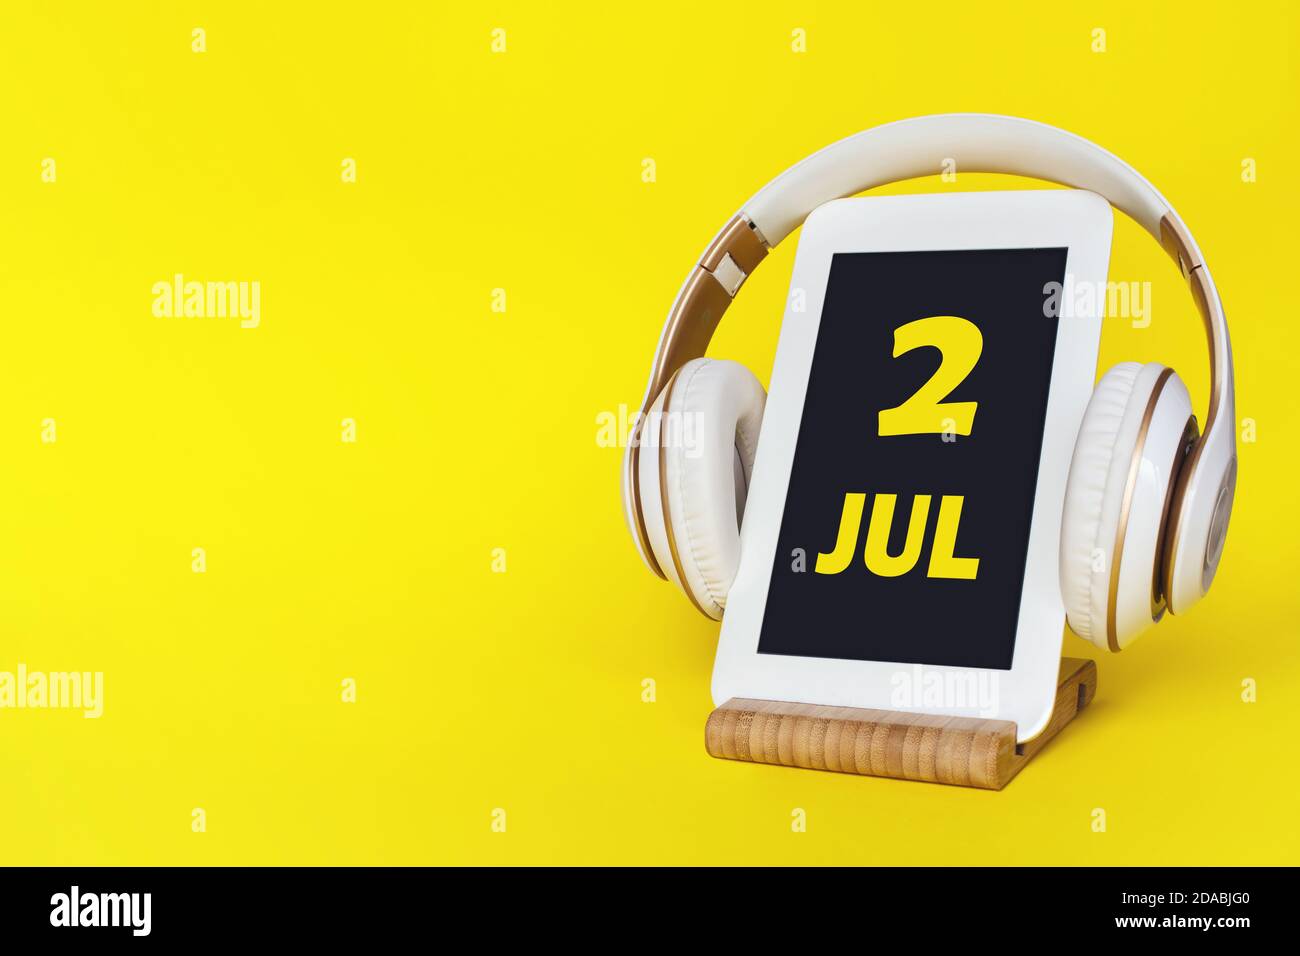 July 2nd. Day 2 of month, Calendar date. Stylish headphones and modern tablet on yellow background. Space for text. Education, technology, lifestyle. Stock Photo